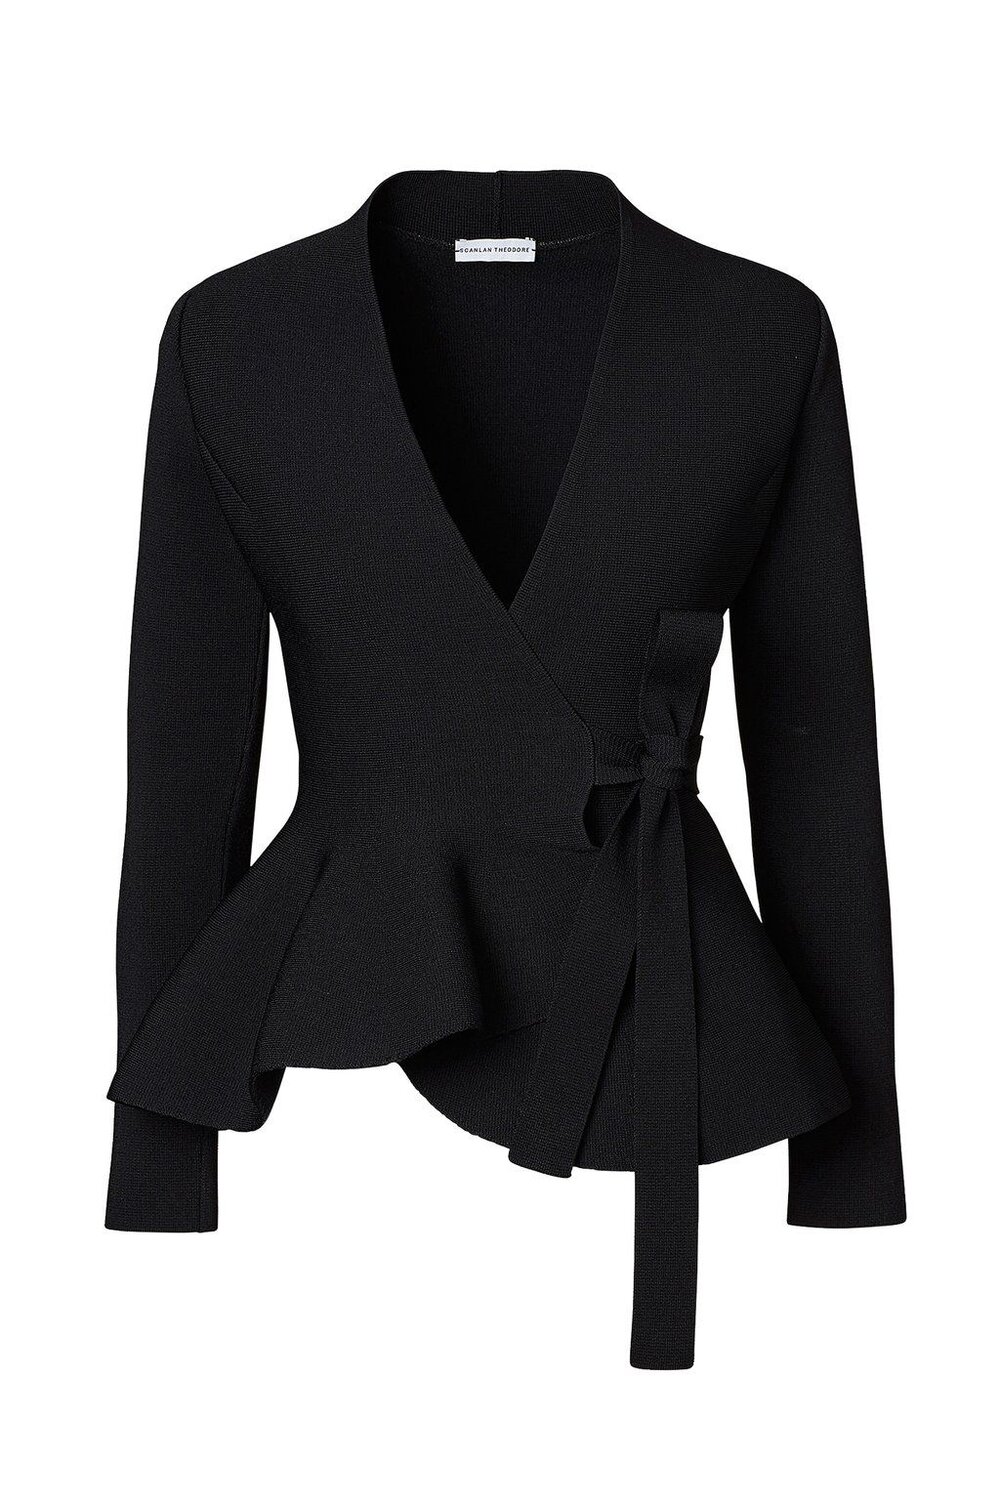 Scanlan Theodore Crepe Knit Wrap Jacket in Black — UFO No More